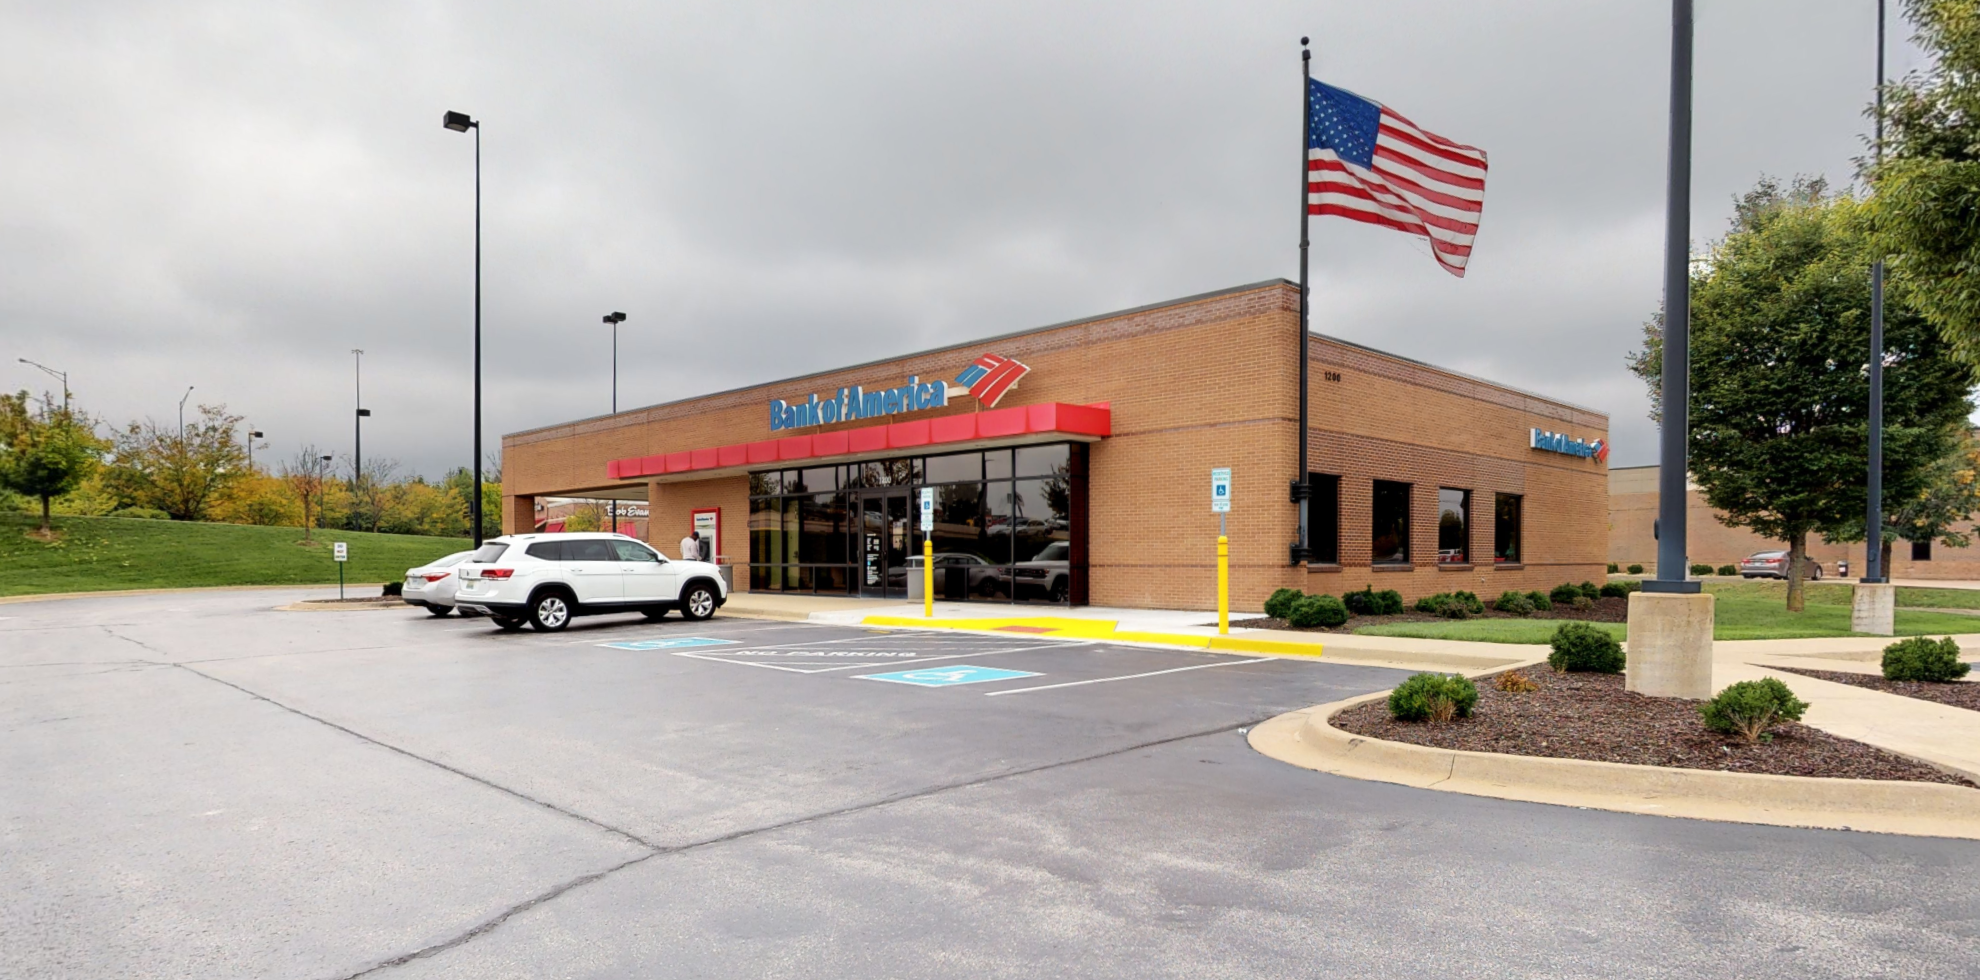 Bank of America financial center with drive-thru ATM | 1200 W Pearce Blvd, Wentzville, MO 63385